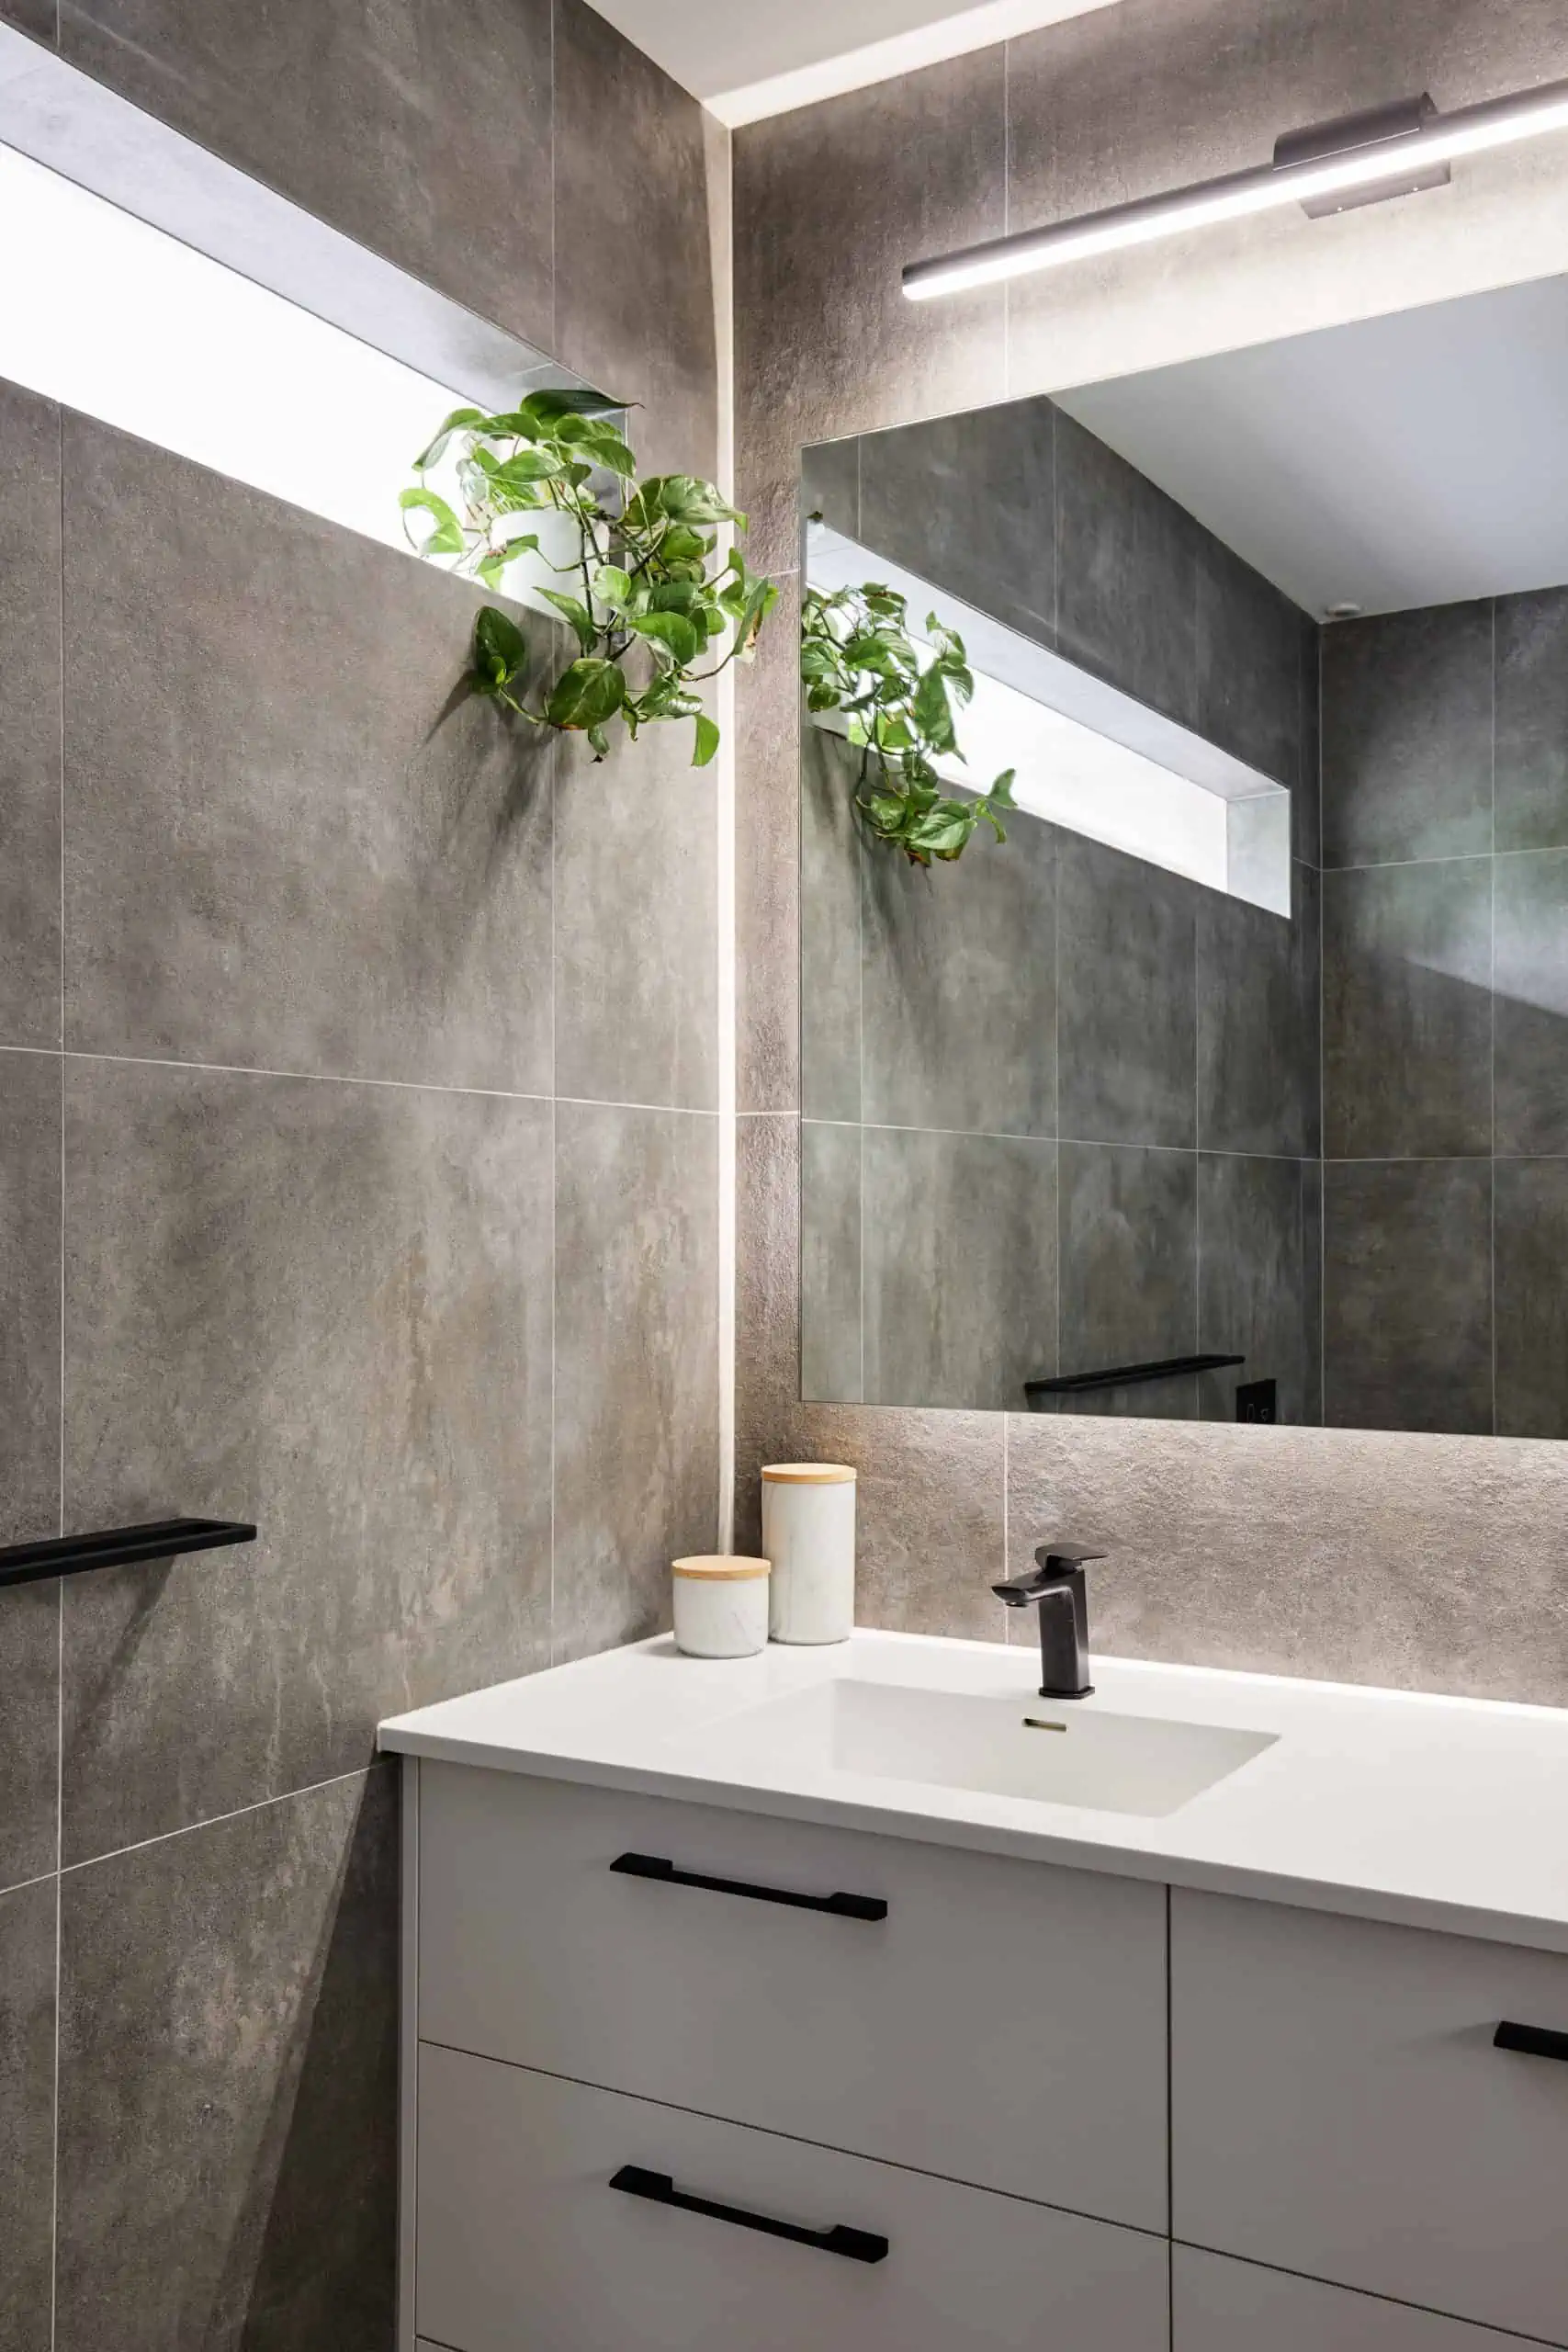 Natural stone wall tiles in a bright bathroom with a white unit